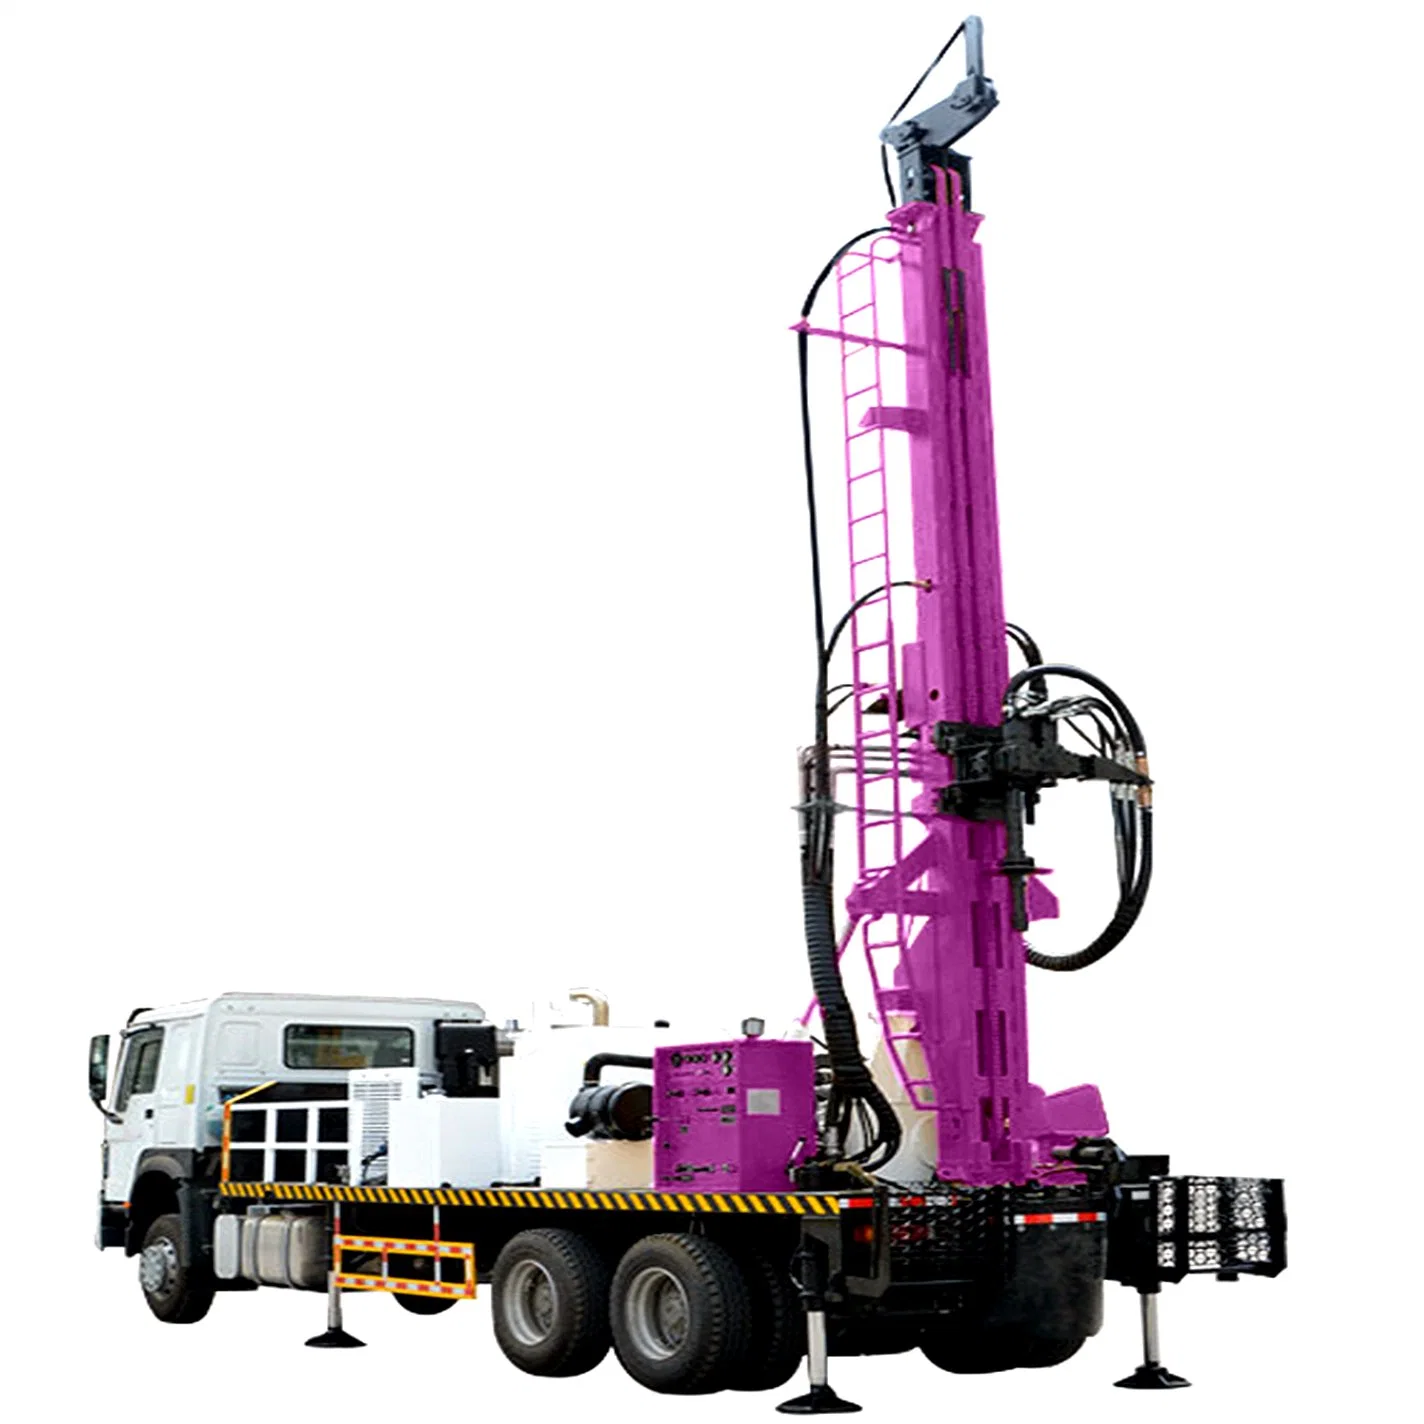 Swcs600 Truck Mounted Well Drilling Rig with Factory Price